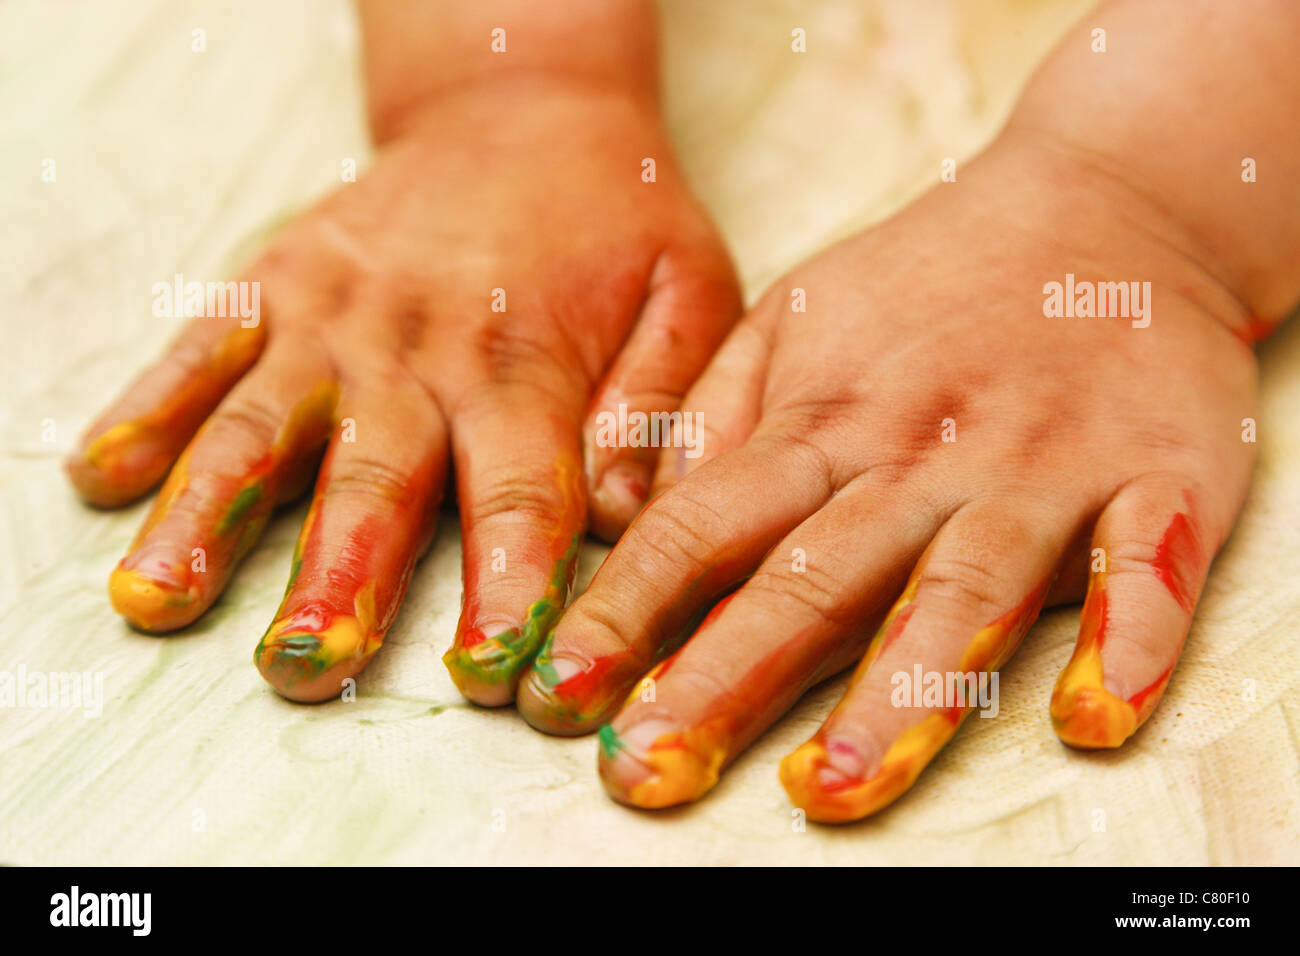 Young child painting with hands - shallow depth of focus Stock Photo